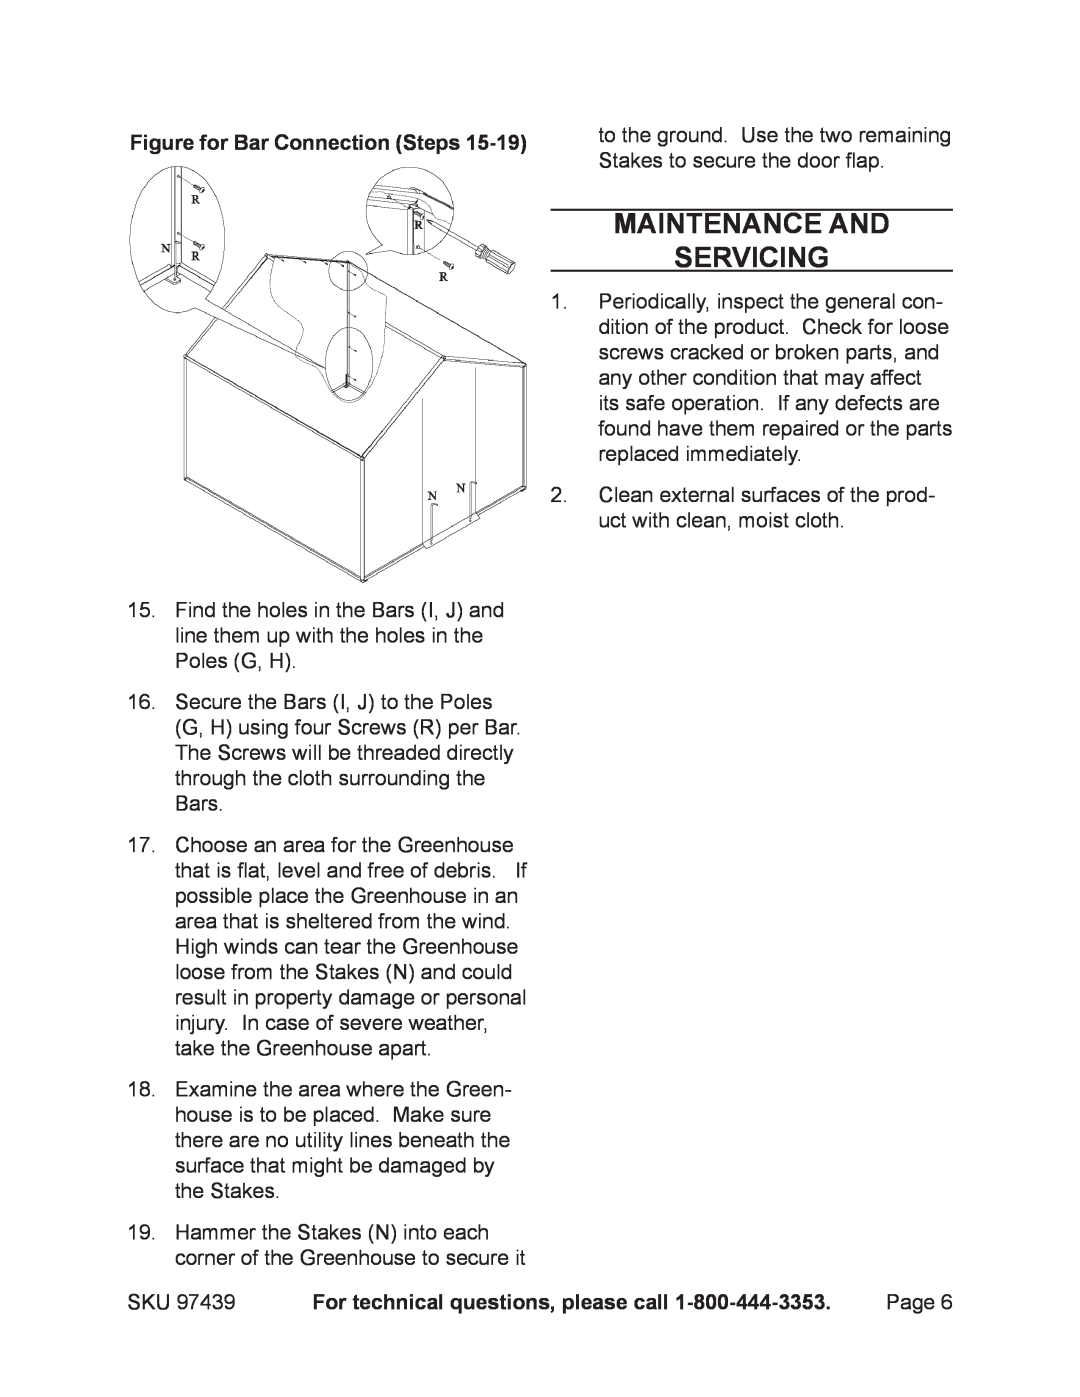 Harbor Freight Tools 97439 manual Maintenance And Servicing, Figure for Bar Connection Steps 